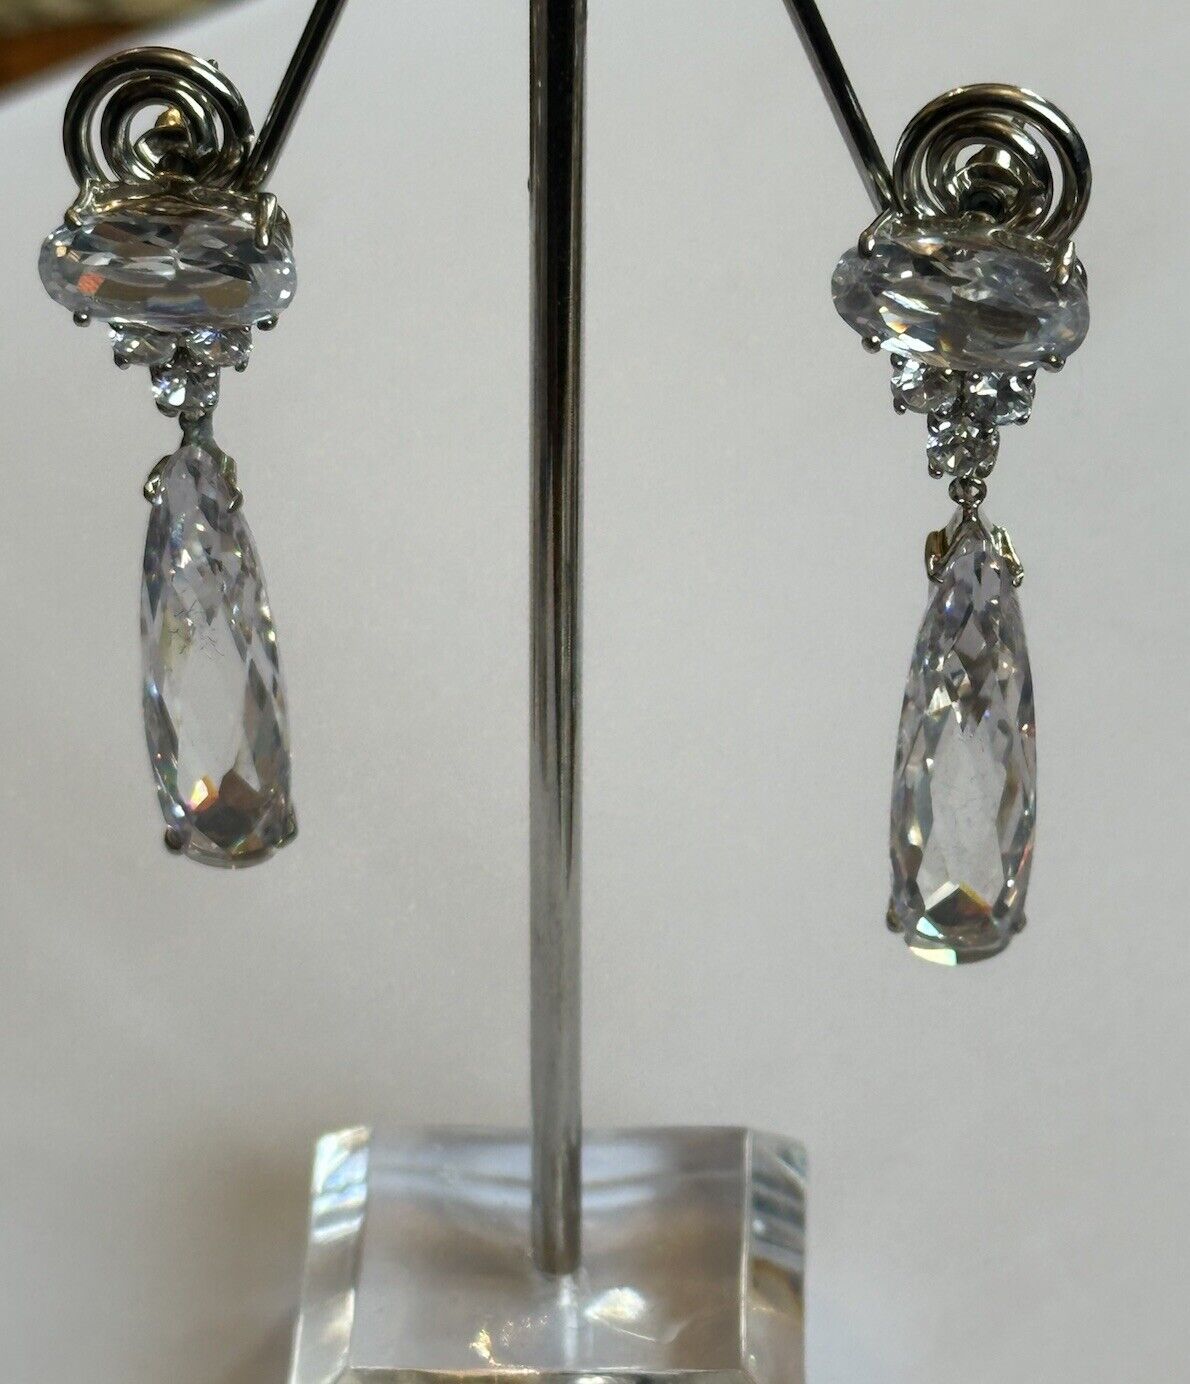 Vintage 1980s Rhodium Plated Clear Crystal Drop Earrings New Old Stock